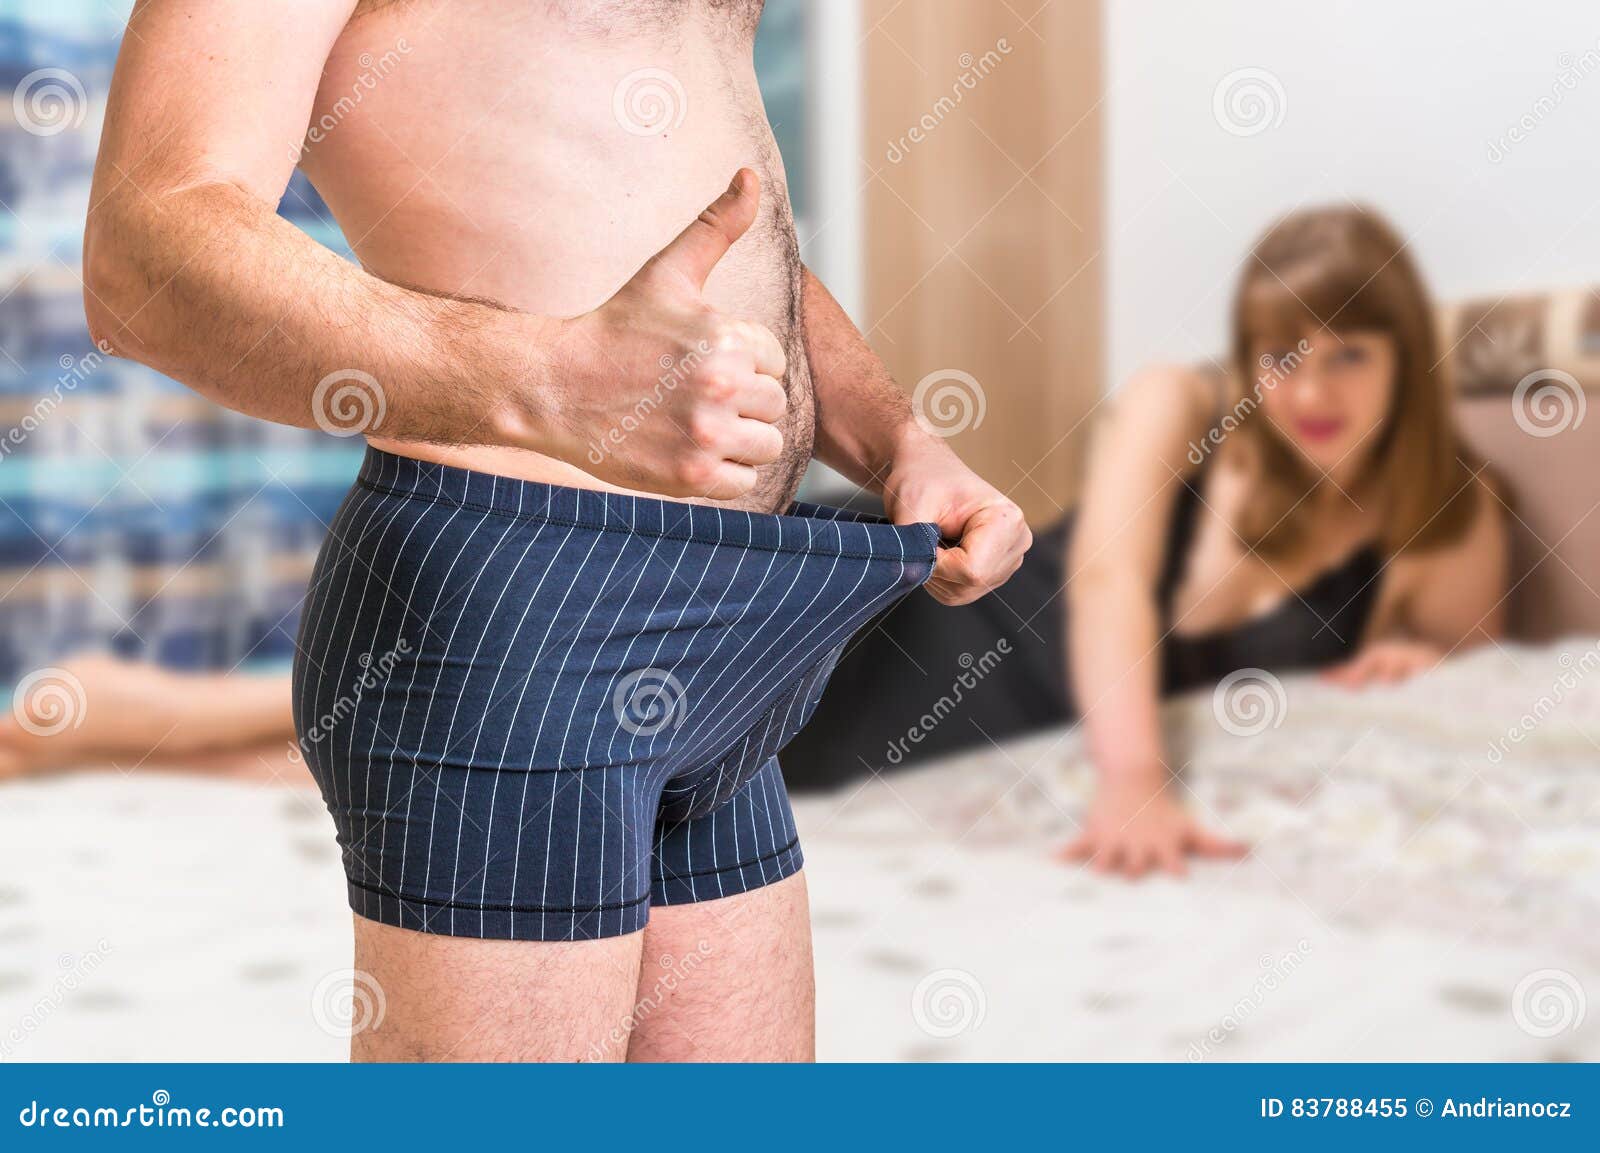 Woman in Bed and Man in Underwear Showing Thumb Up Stock Image